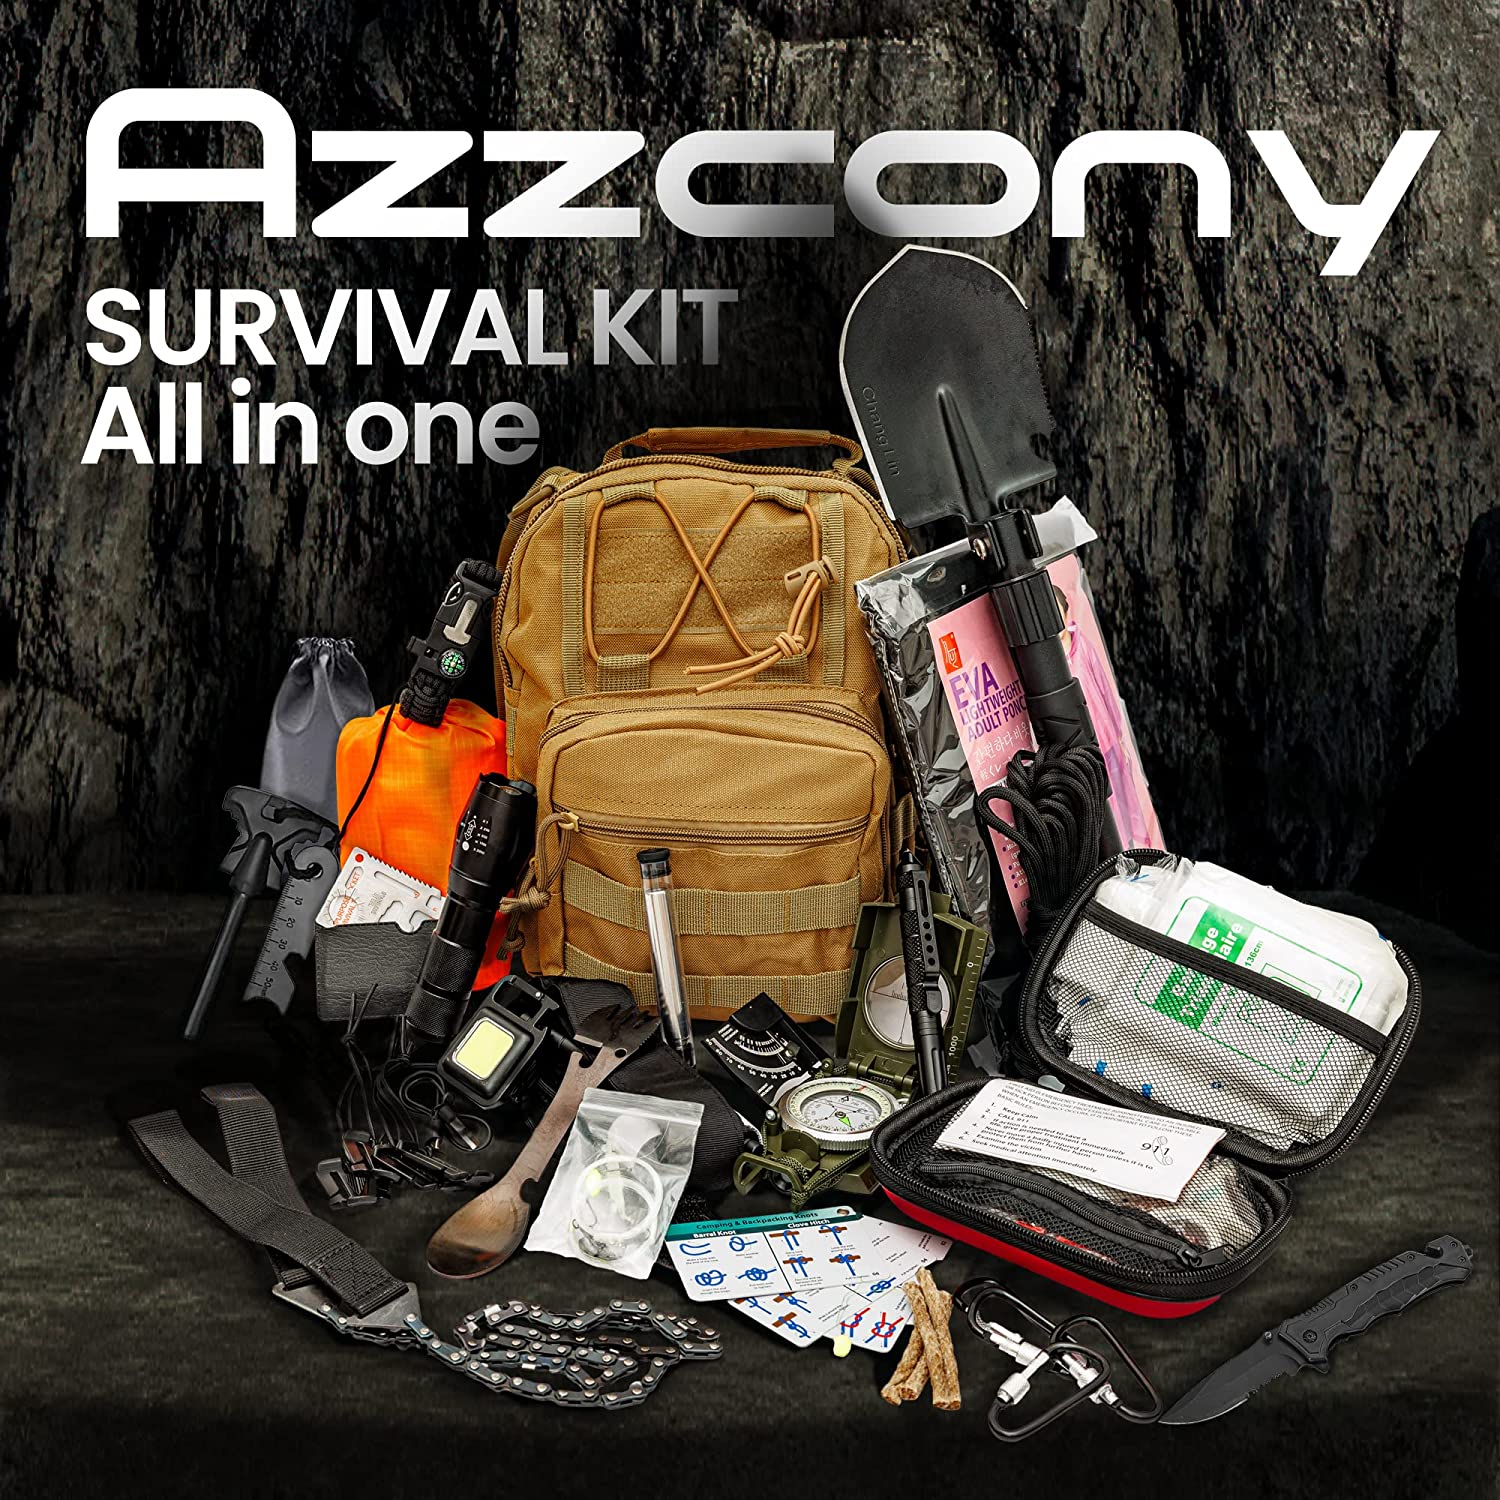 Be Prepared: The Importance of Having an Emergency Survival Kit